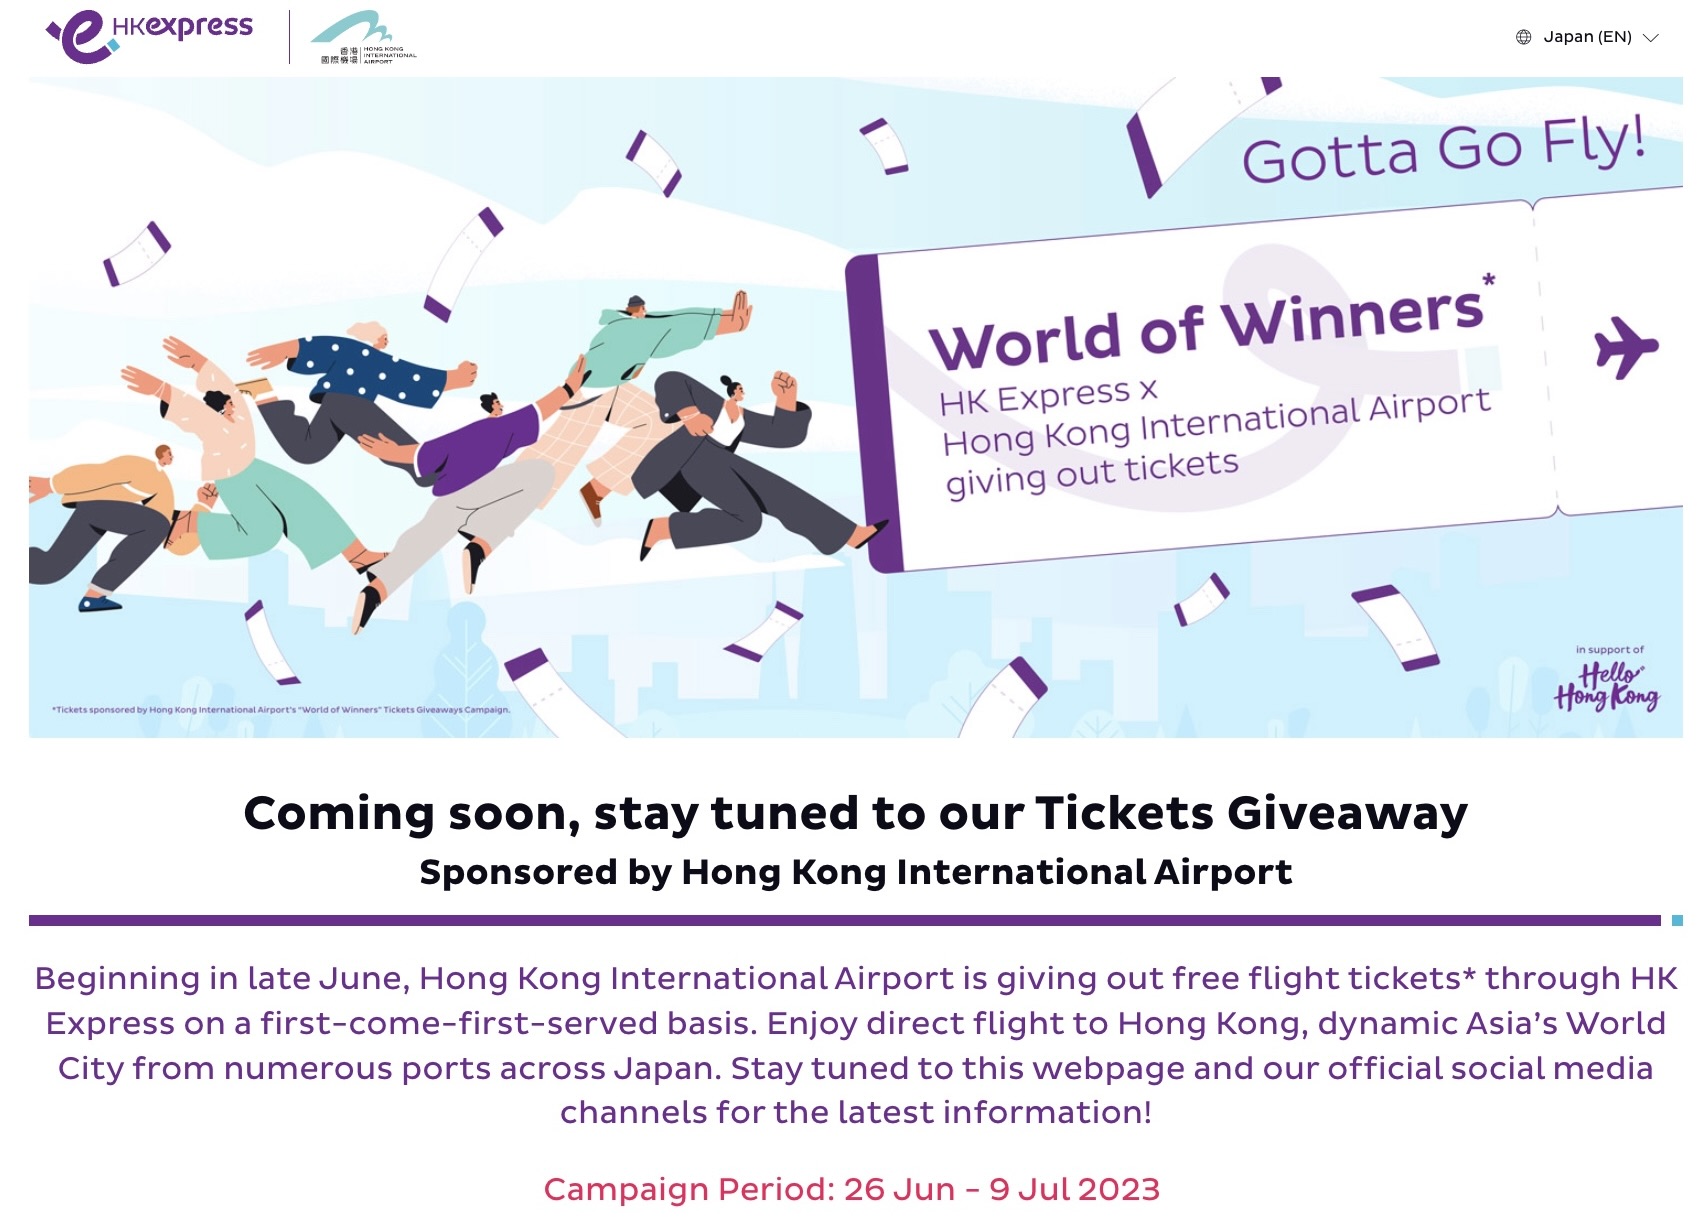 HK Express will give away free tickets from Japan to Hong Kong from June 26-July 9.